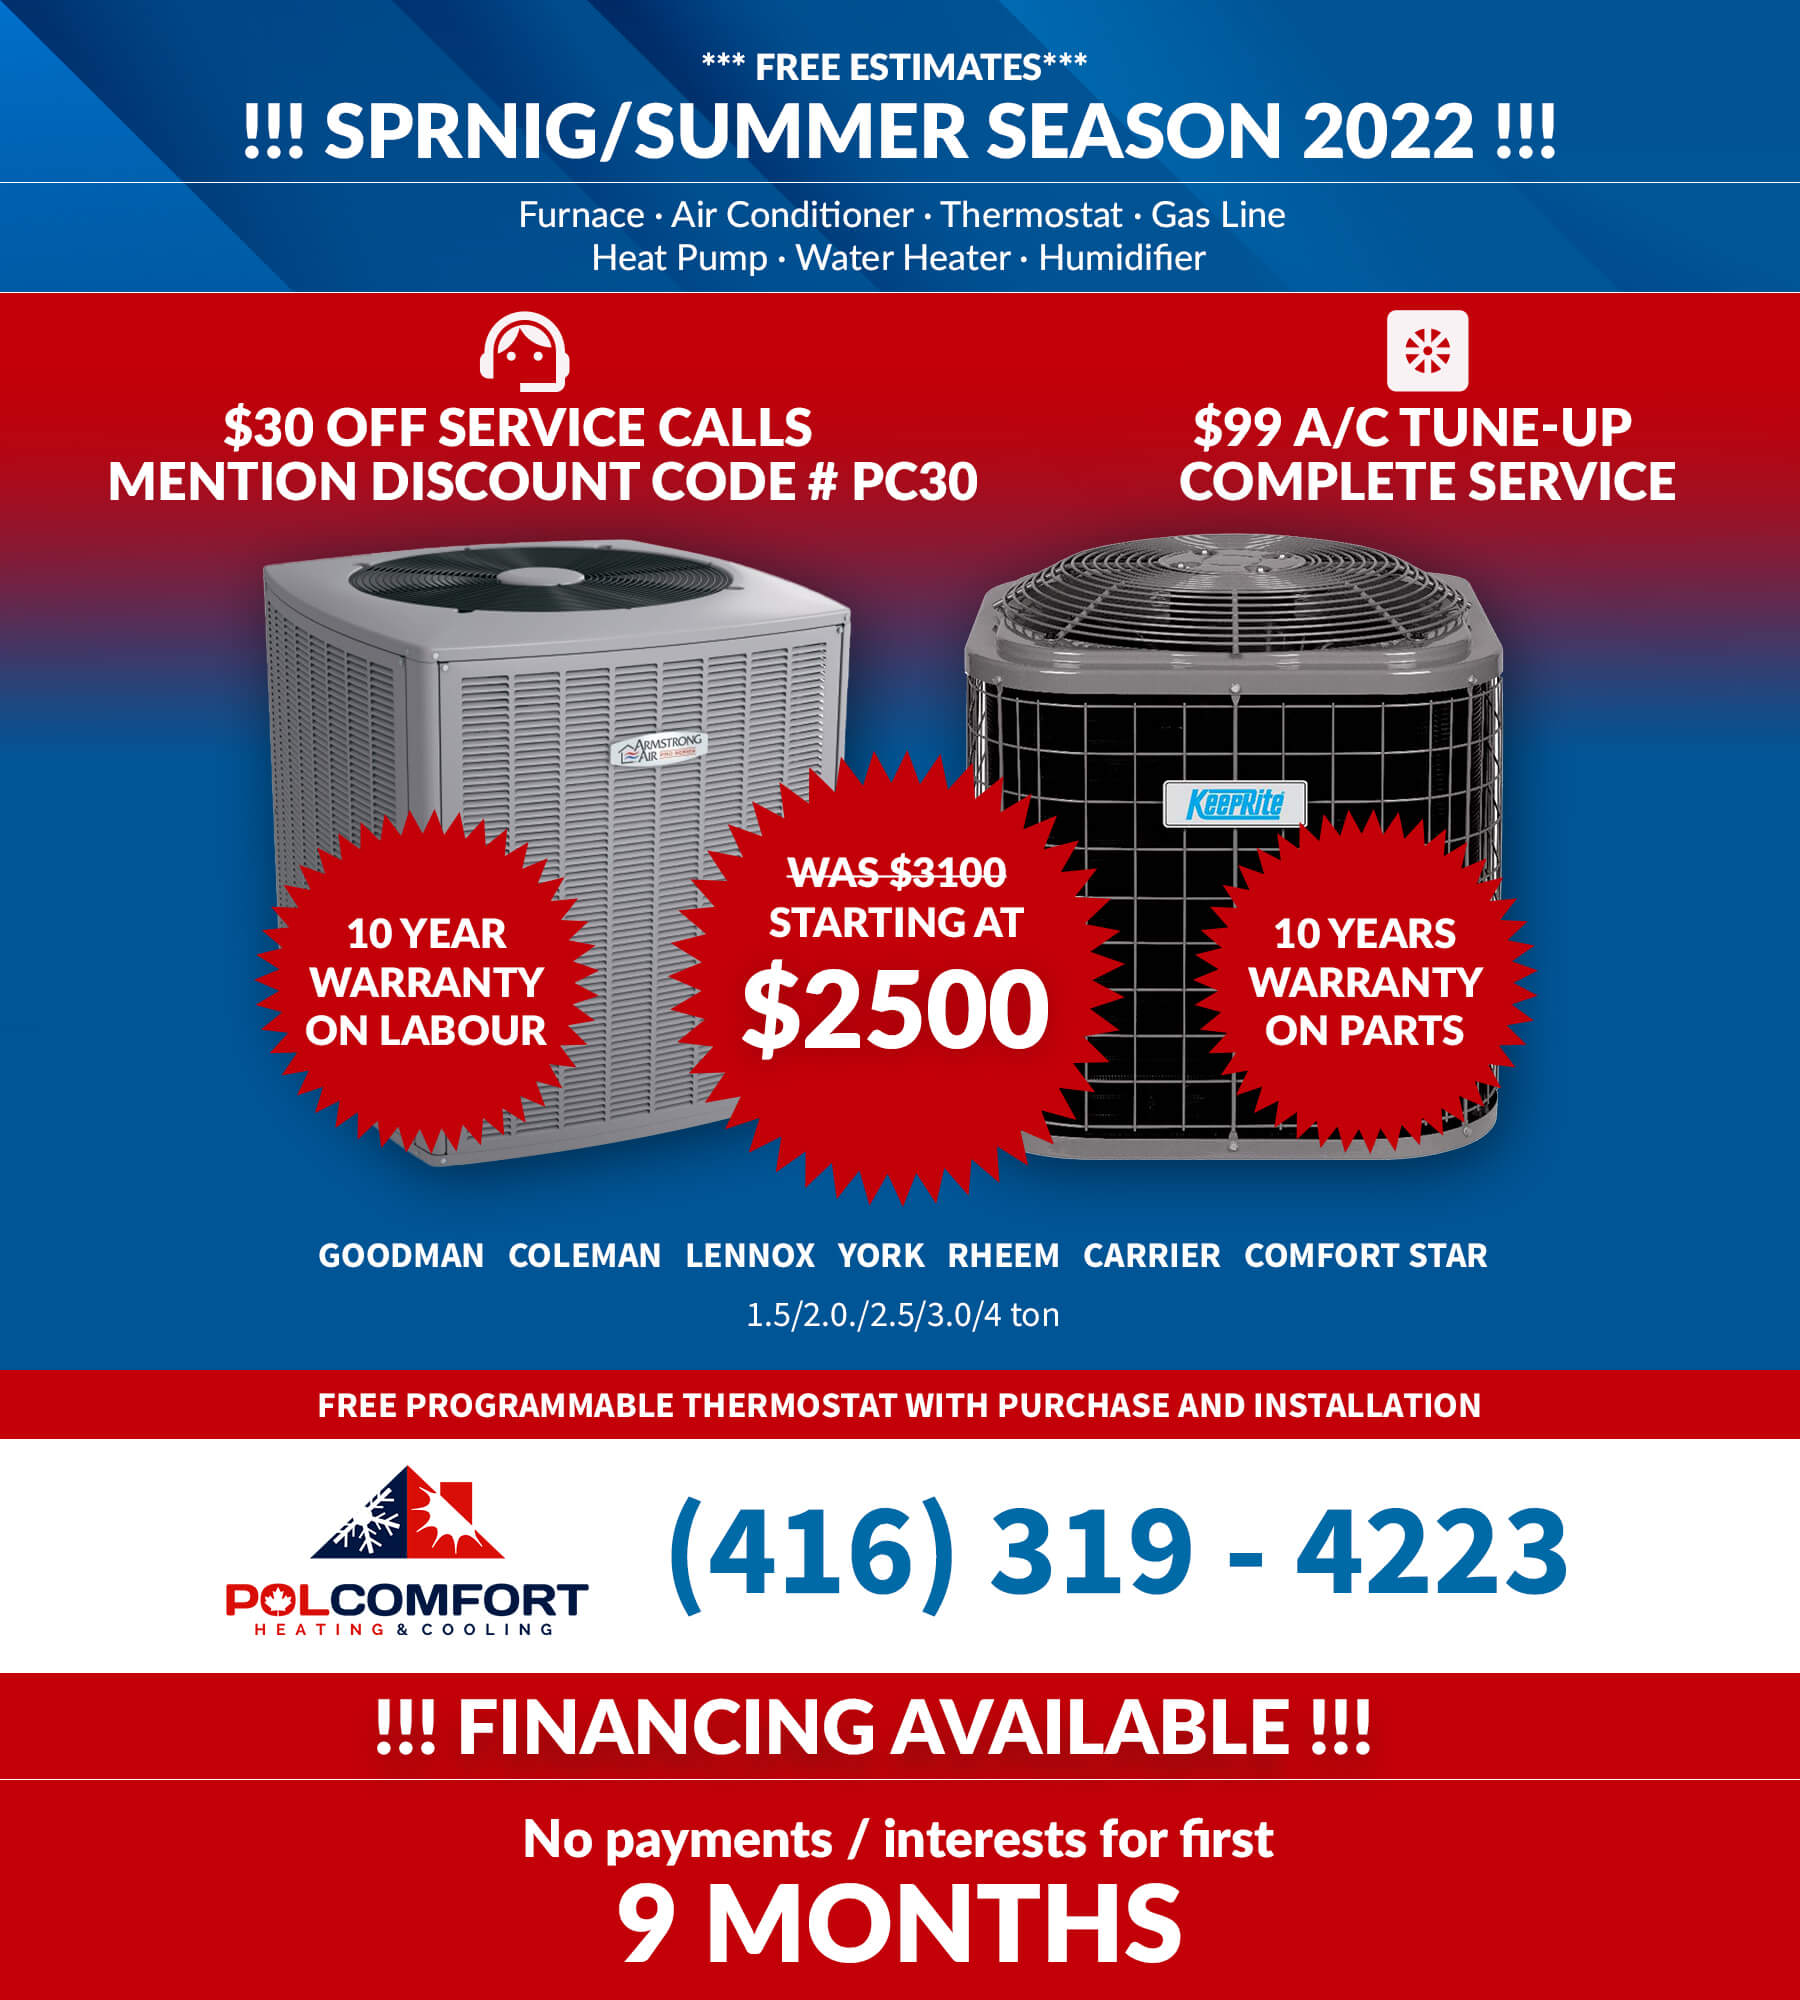 Hamilton Air Conditioning offer